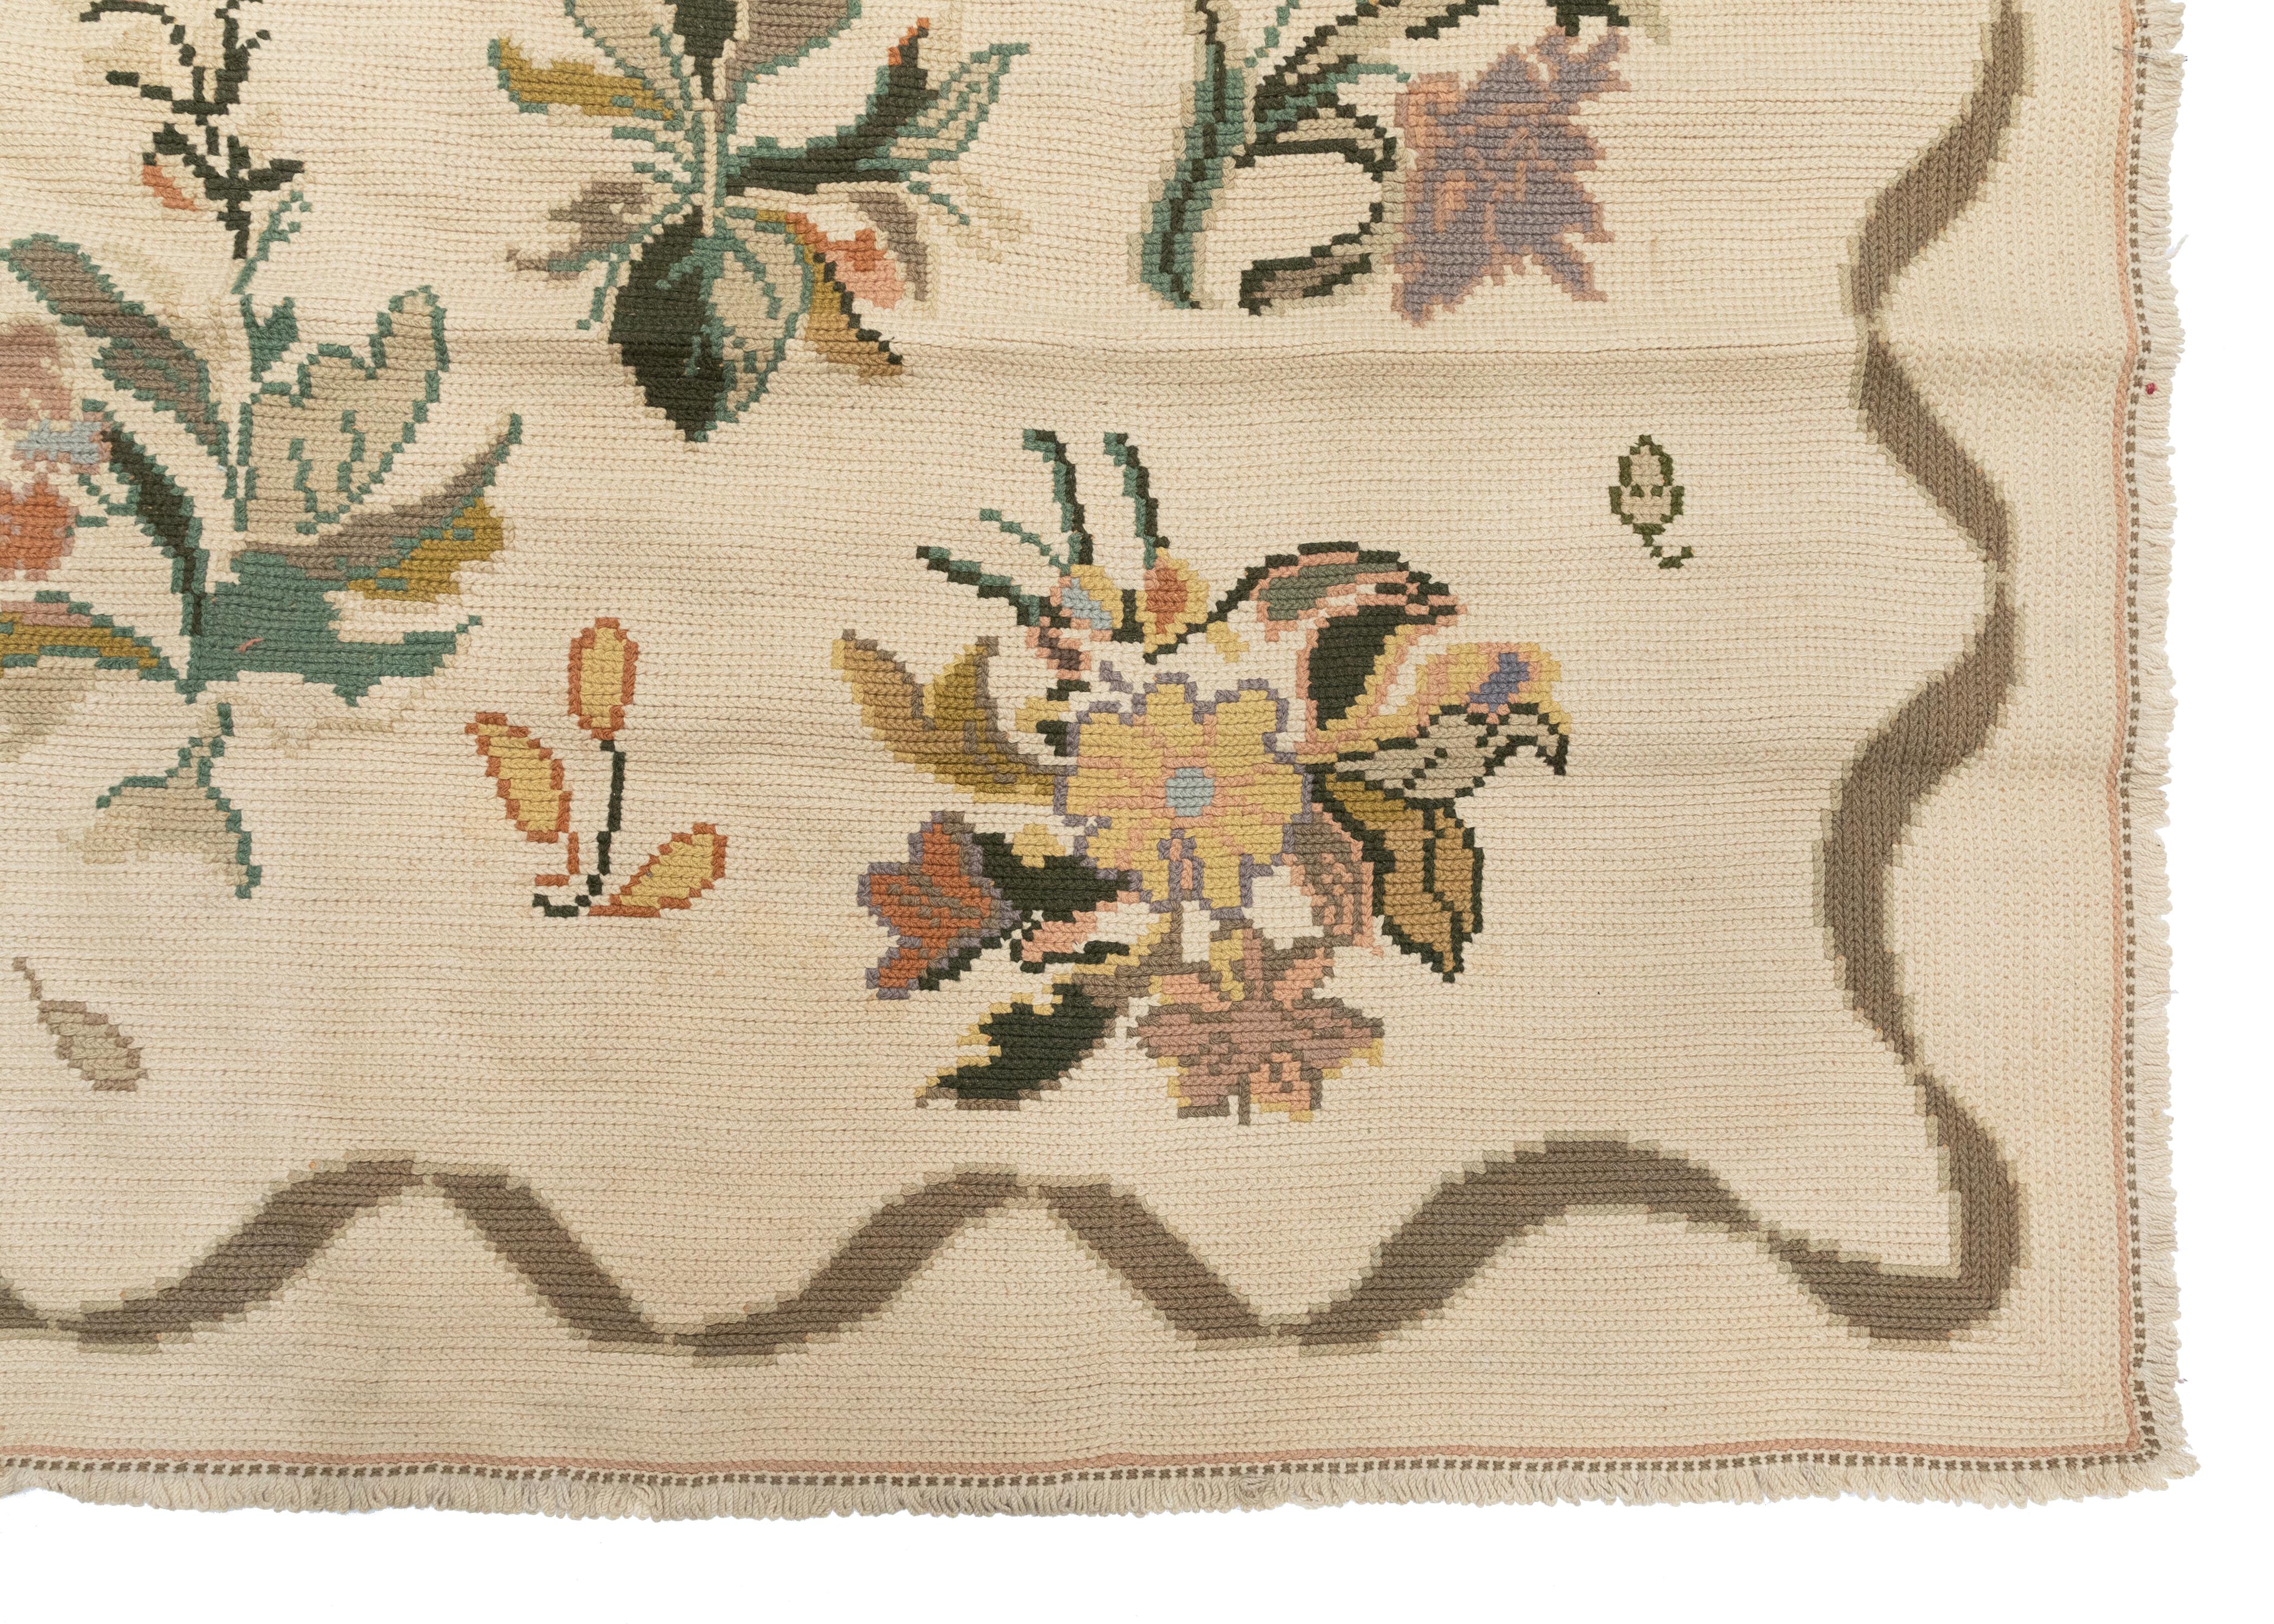 Antique Ivory Portuguese Needlepoint Rug with Flowers, circa 1930-1940s In Good Condition For Sale In New York, NY